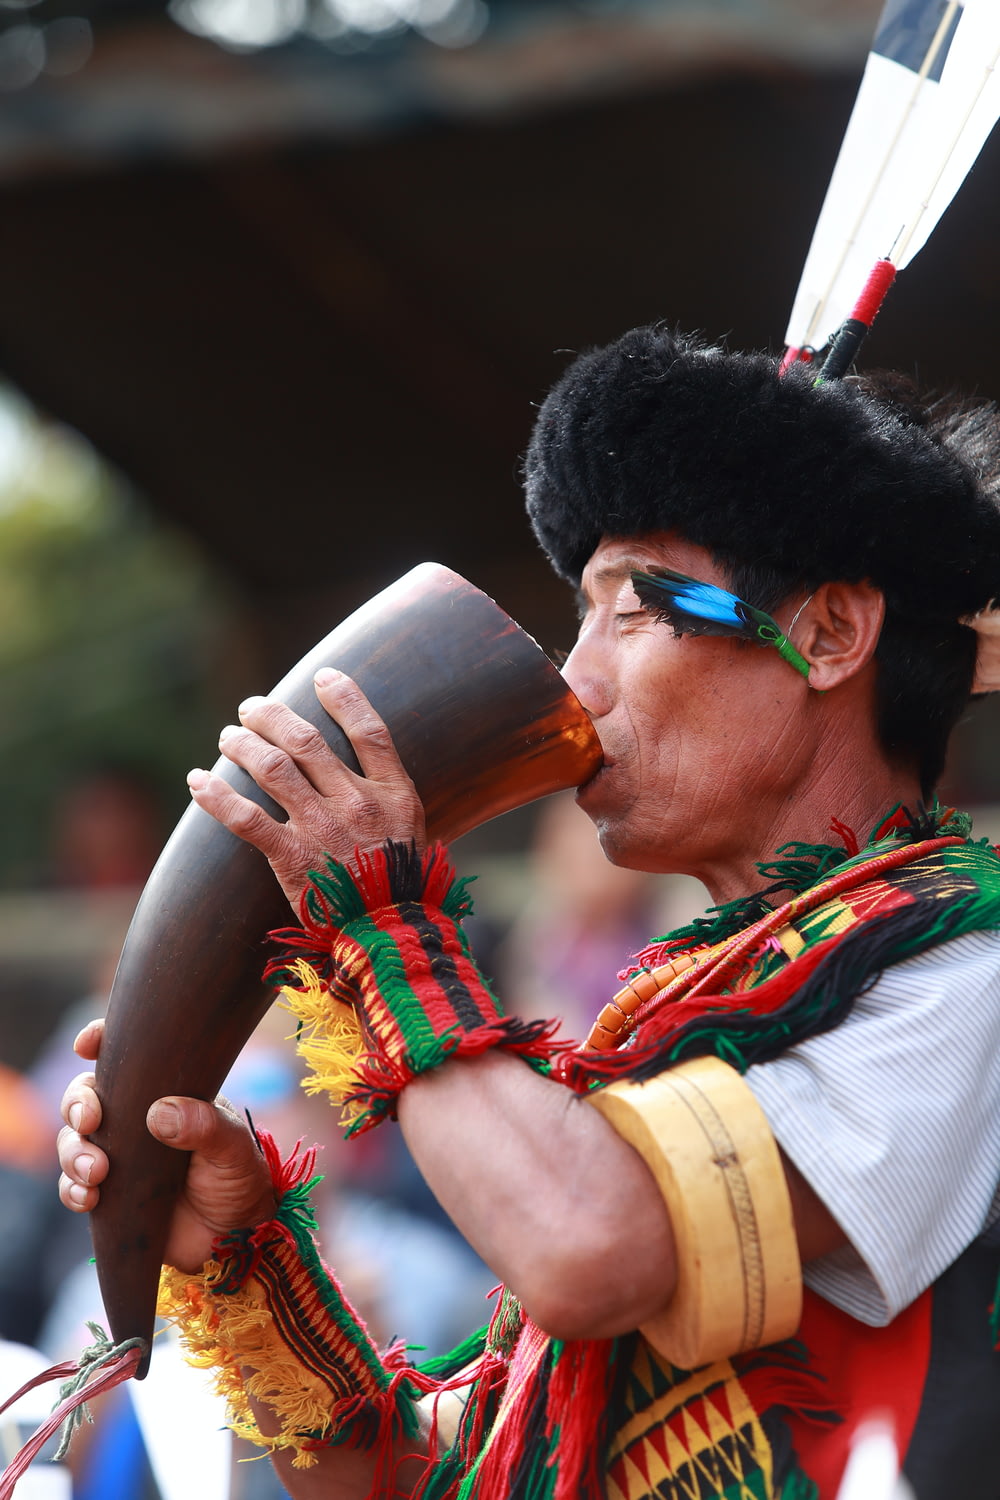 a man in a native american costume drinking from a cup